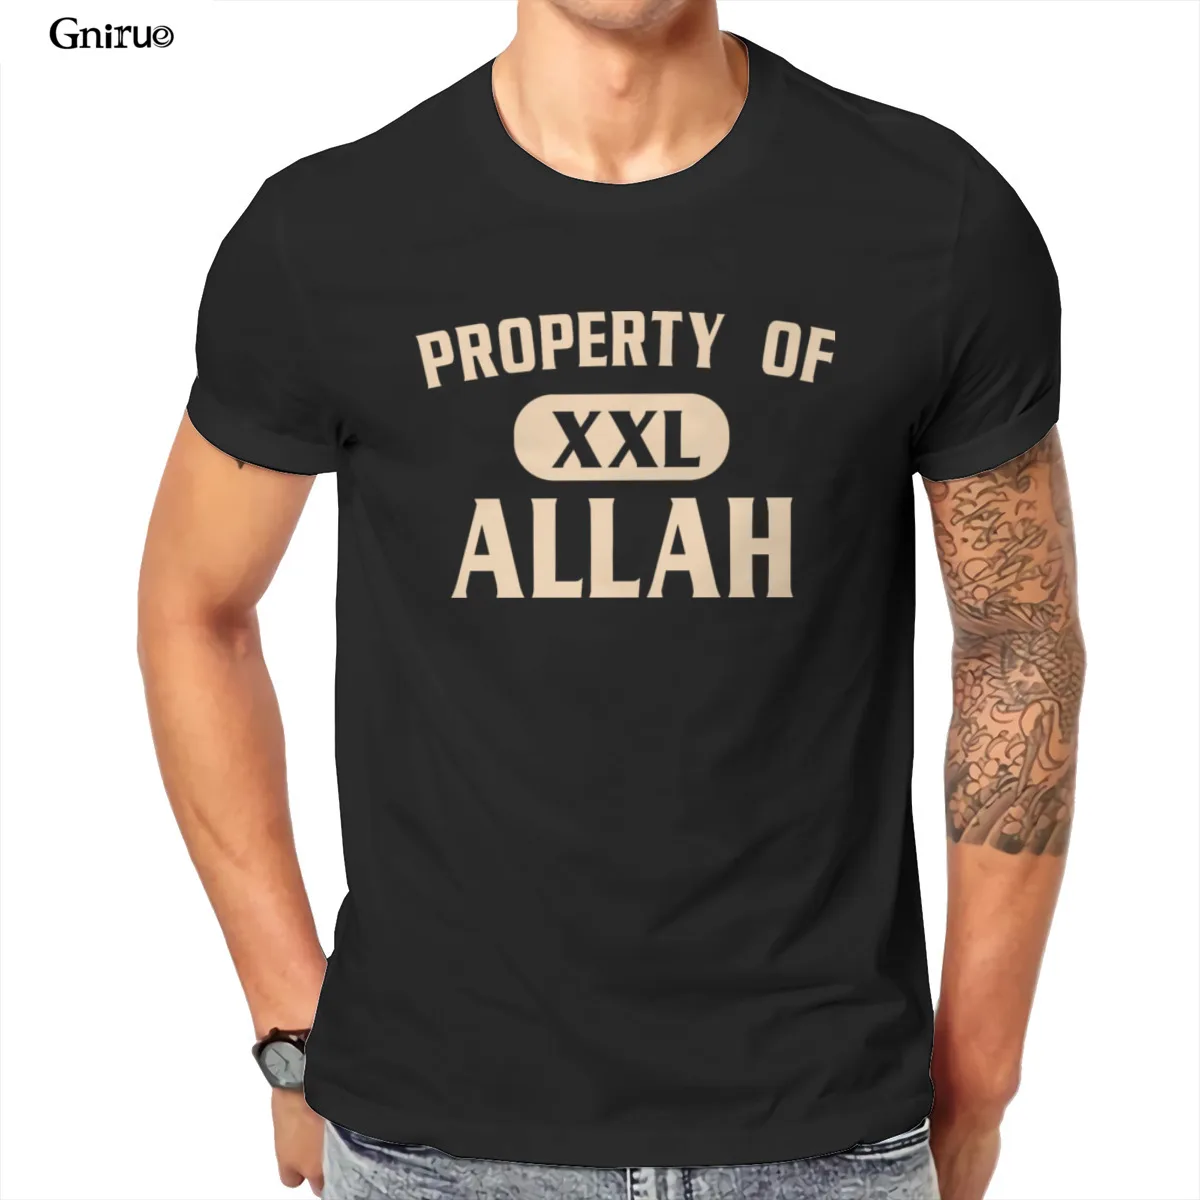 

Wholesale Property of Allah Unisex Tie Dye T-Shirt Pink Oversized HipHop KoreanStyle 105151